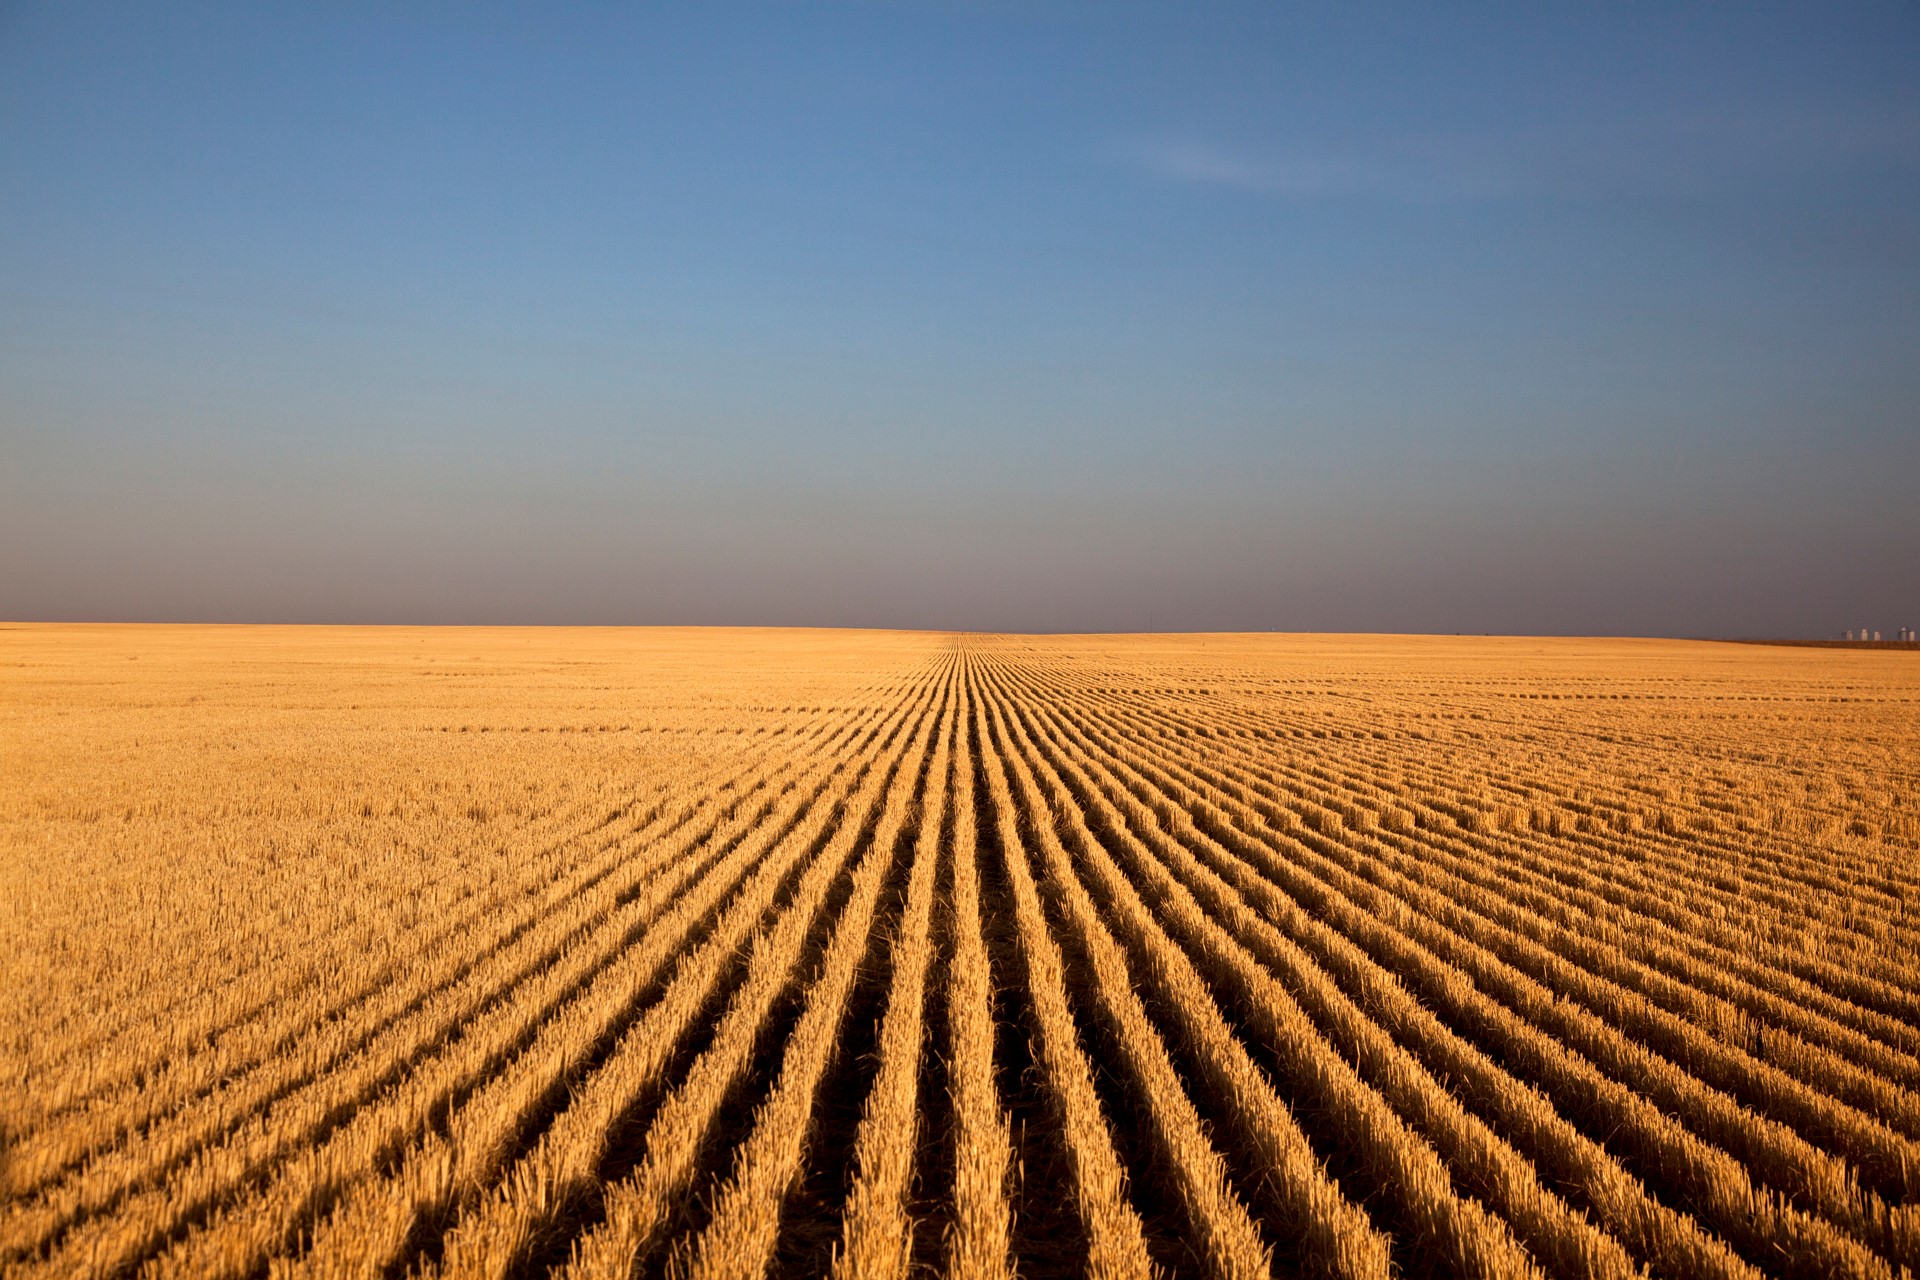 The Wichita Art Museum is exhibiting “Kansas Land: Farm Photography by Larry Schwarm and Bryon Darby with University of Kansas Faculty” through January 2019. The exhibit explores many facets of farming and how it has evolved. Photos include Schwarm’s “Wheat Stubble at Sunrise, Lane County.”